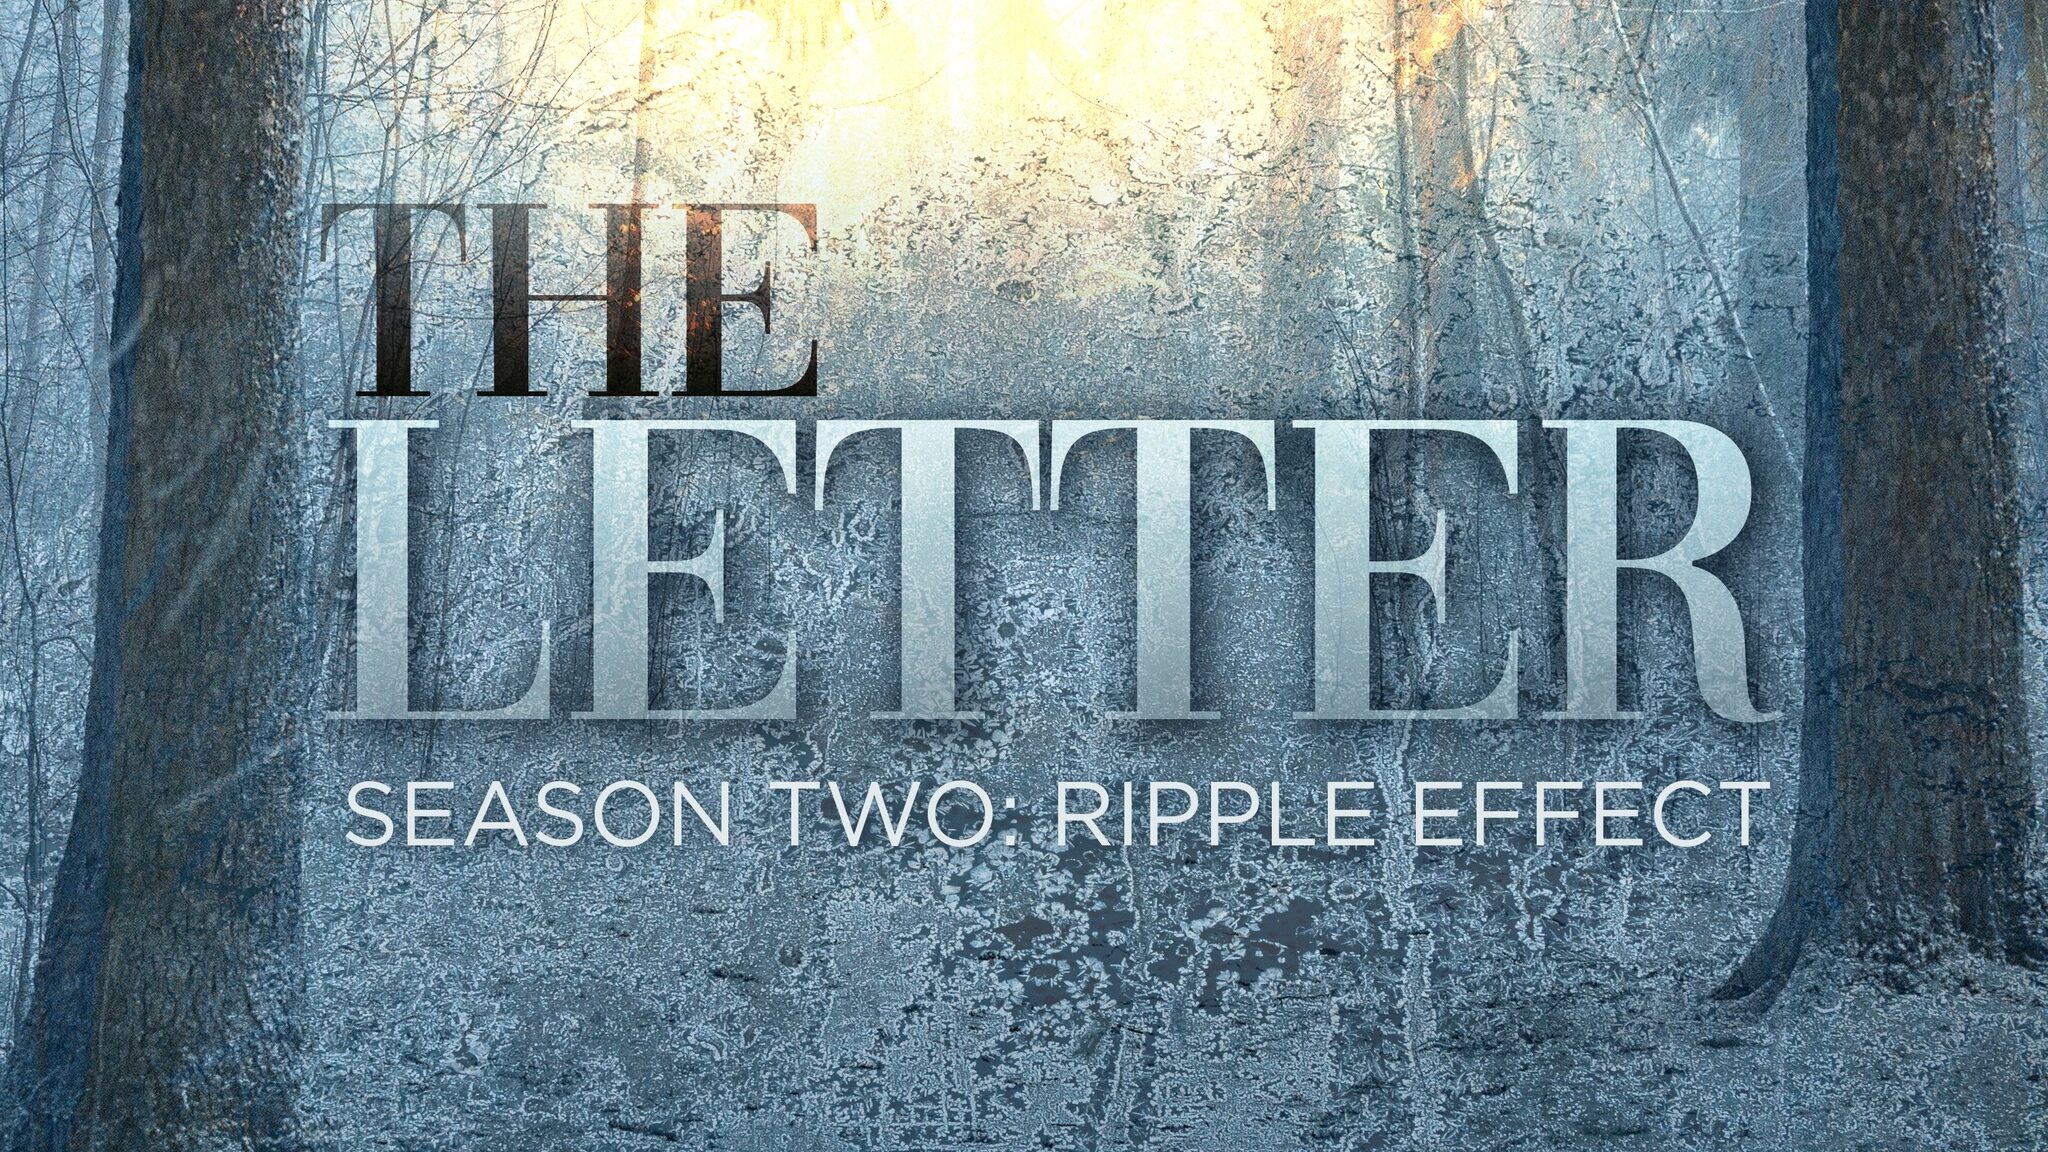 The second episode of The Letter's second season, "Ripple Effect," details the second man killed in...